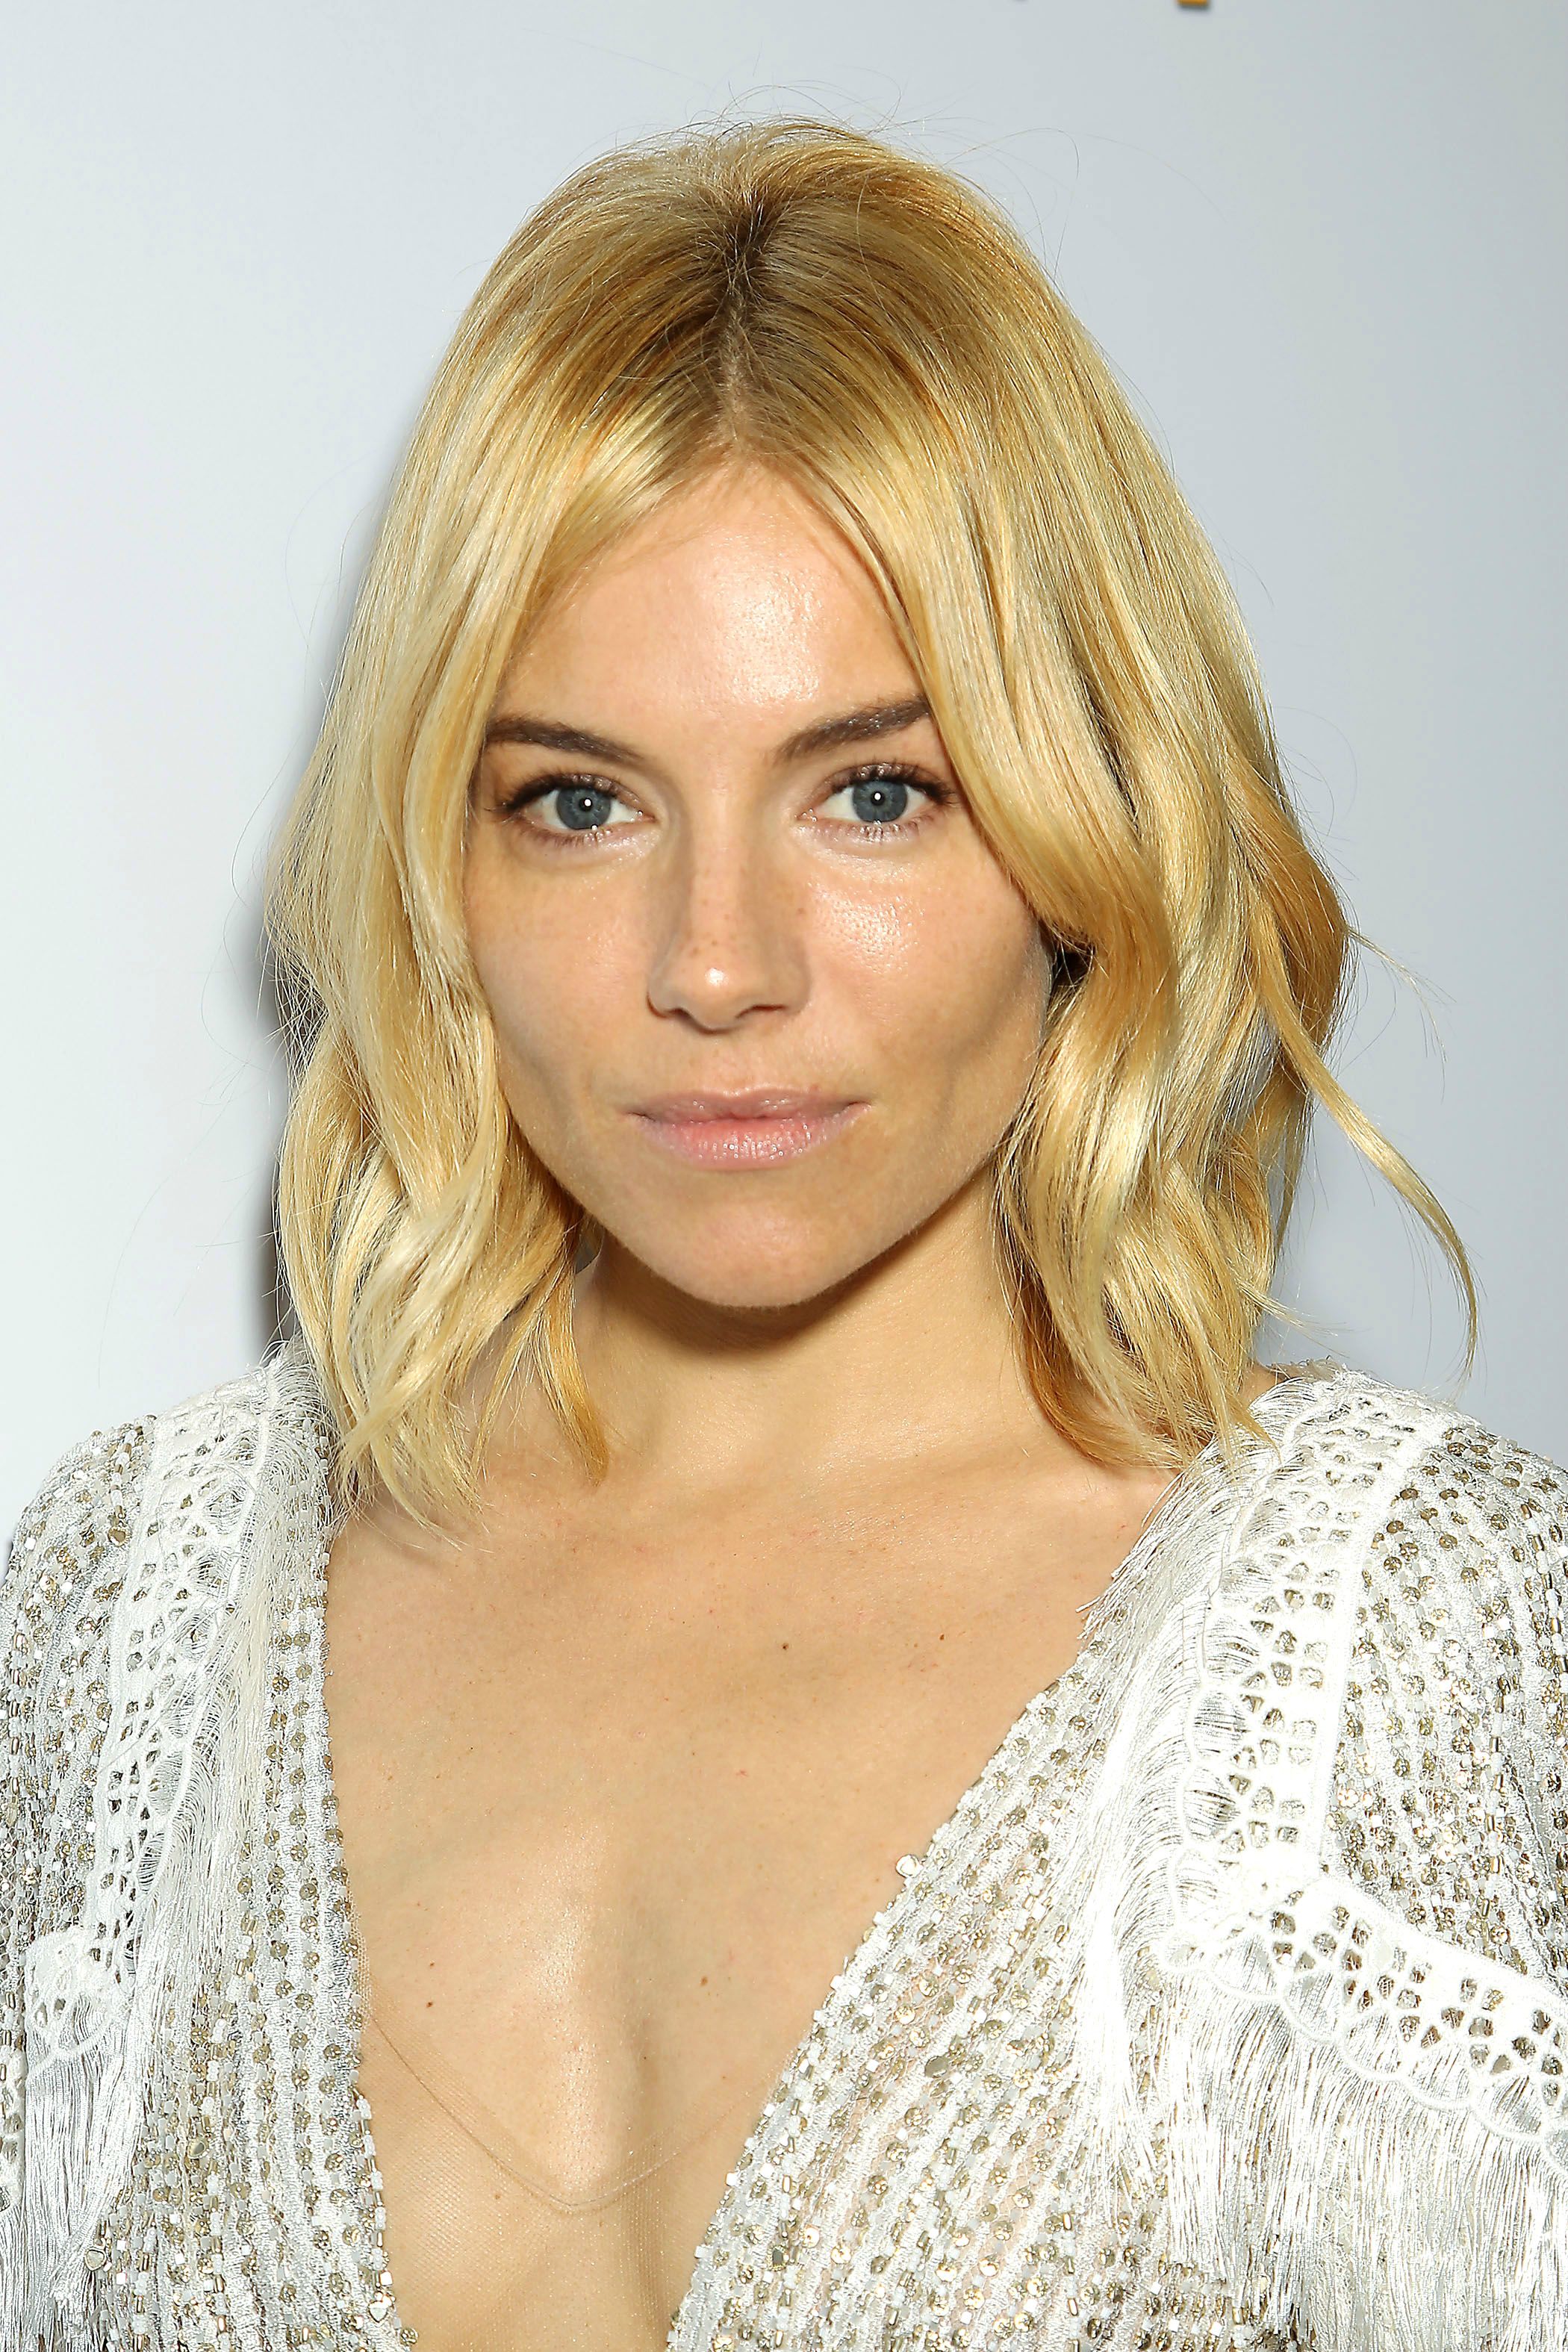 Sienna Miller in a low cut white dress exposing cleavage